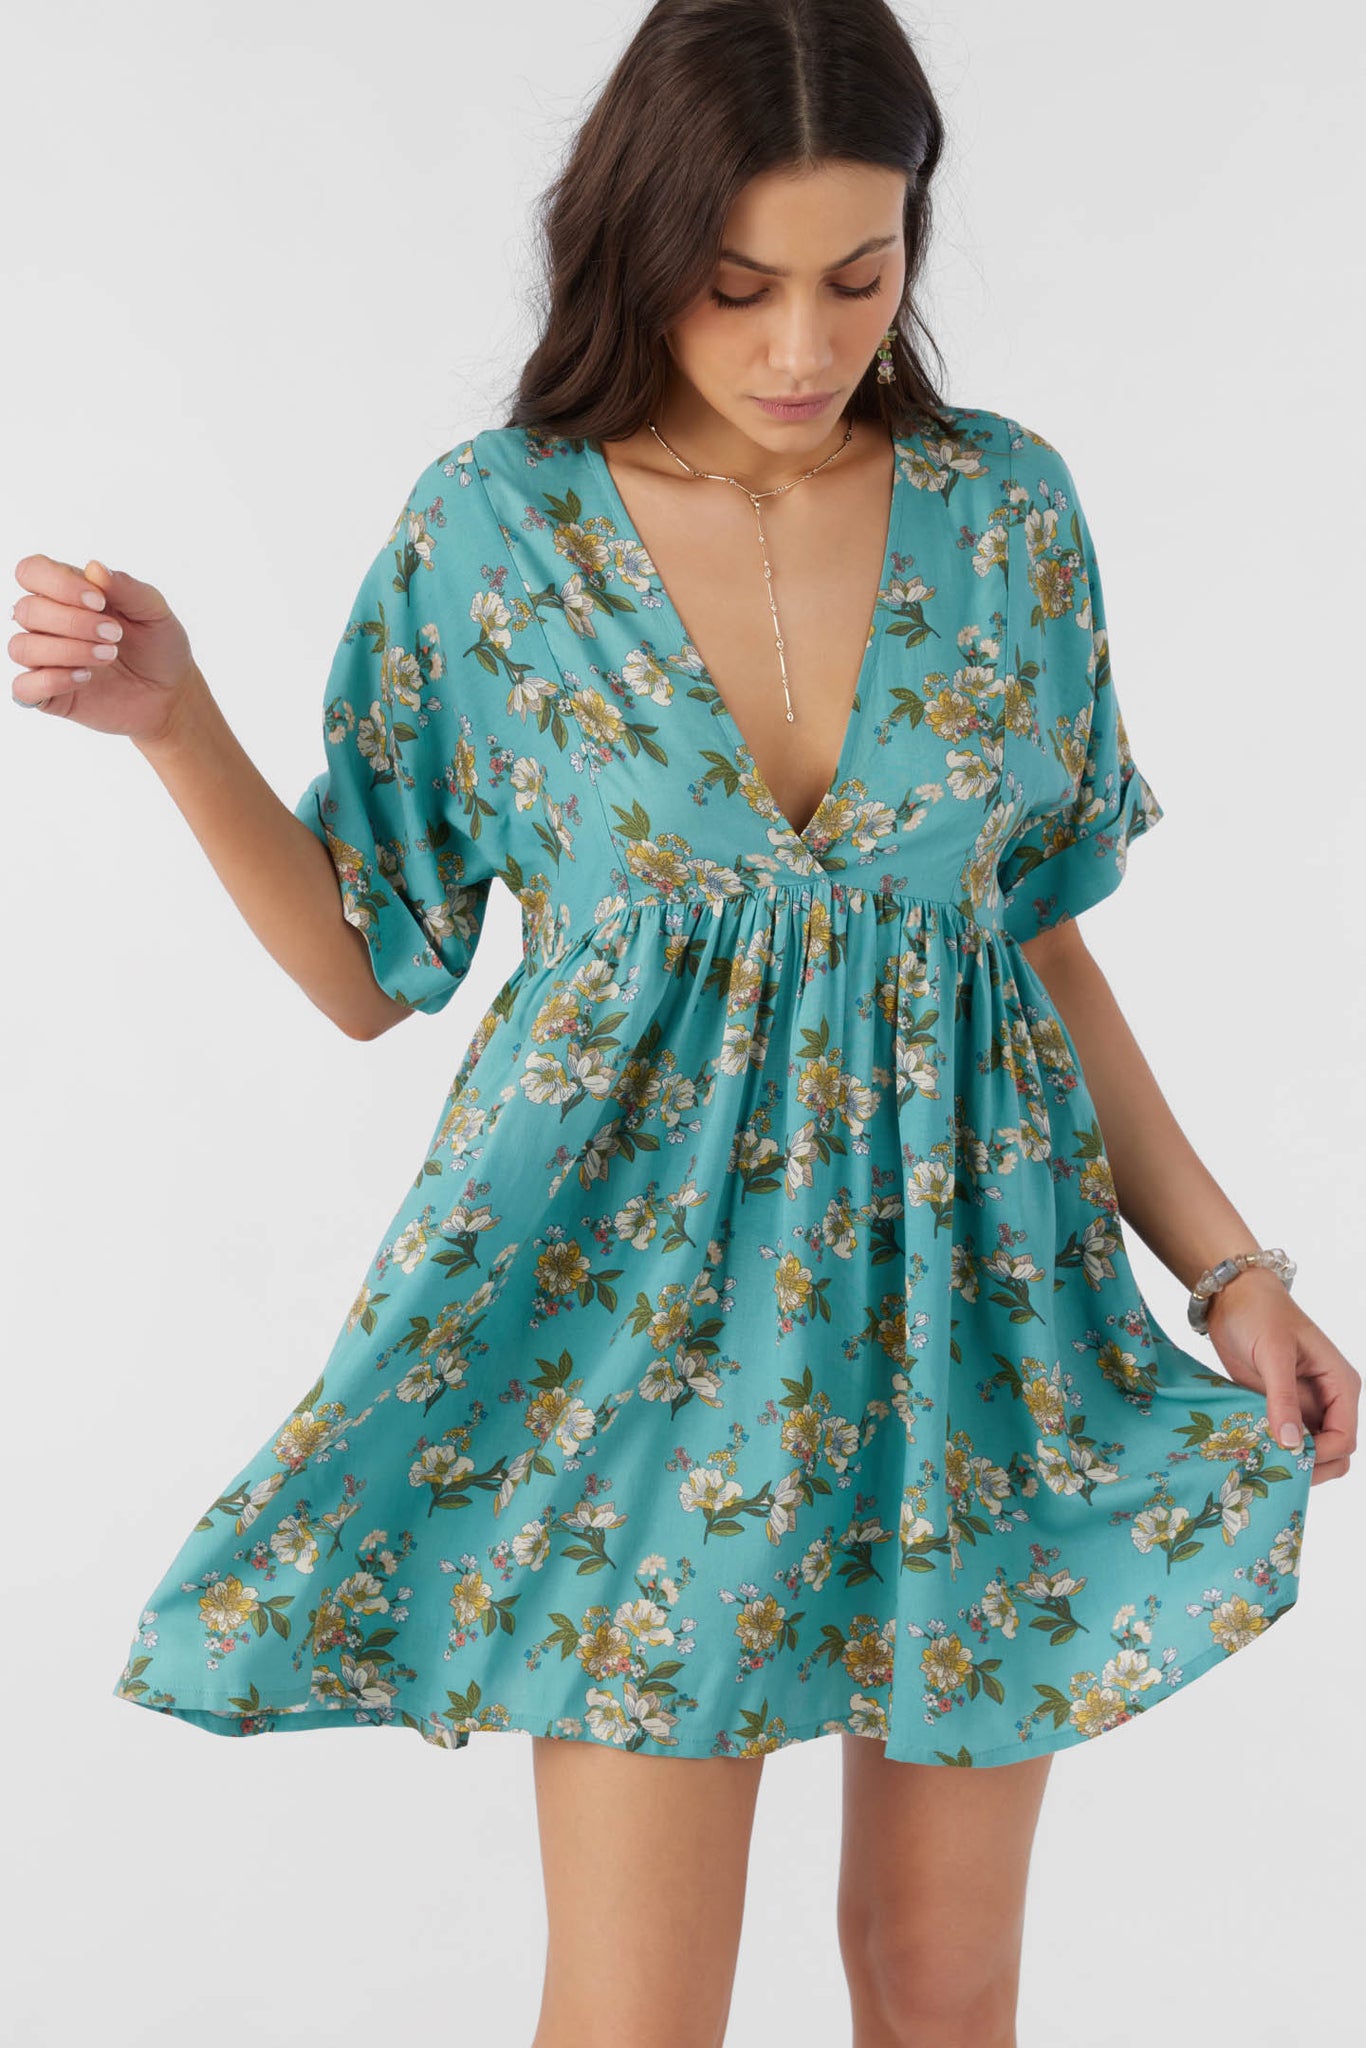 ROSEMARY MARLOW FLORAL DRESS